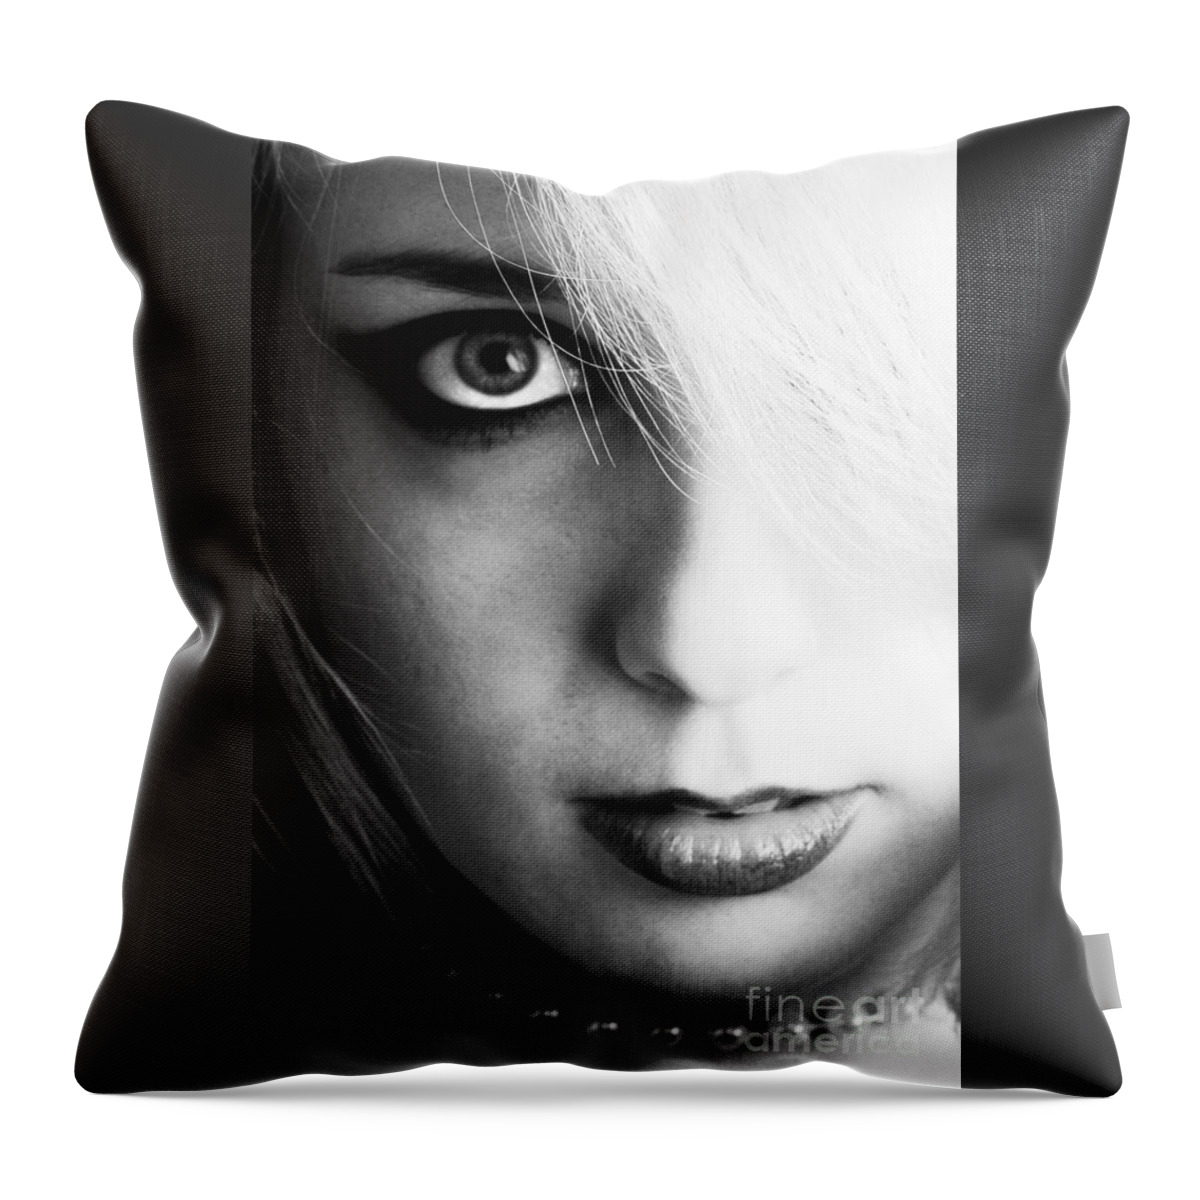 Artistic Throw Pillow featuring the photograph Vast Impression by Robert WK Clark